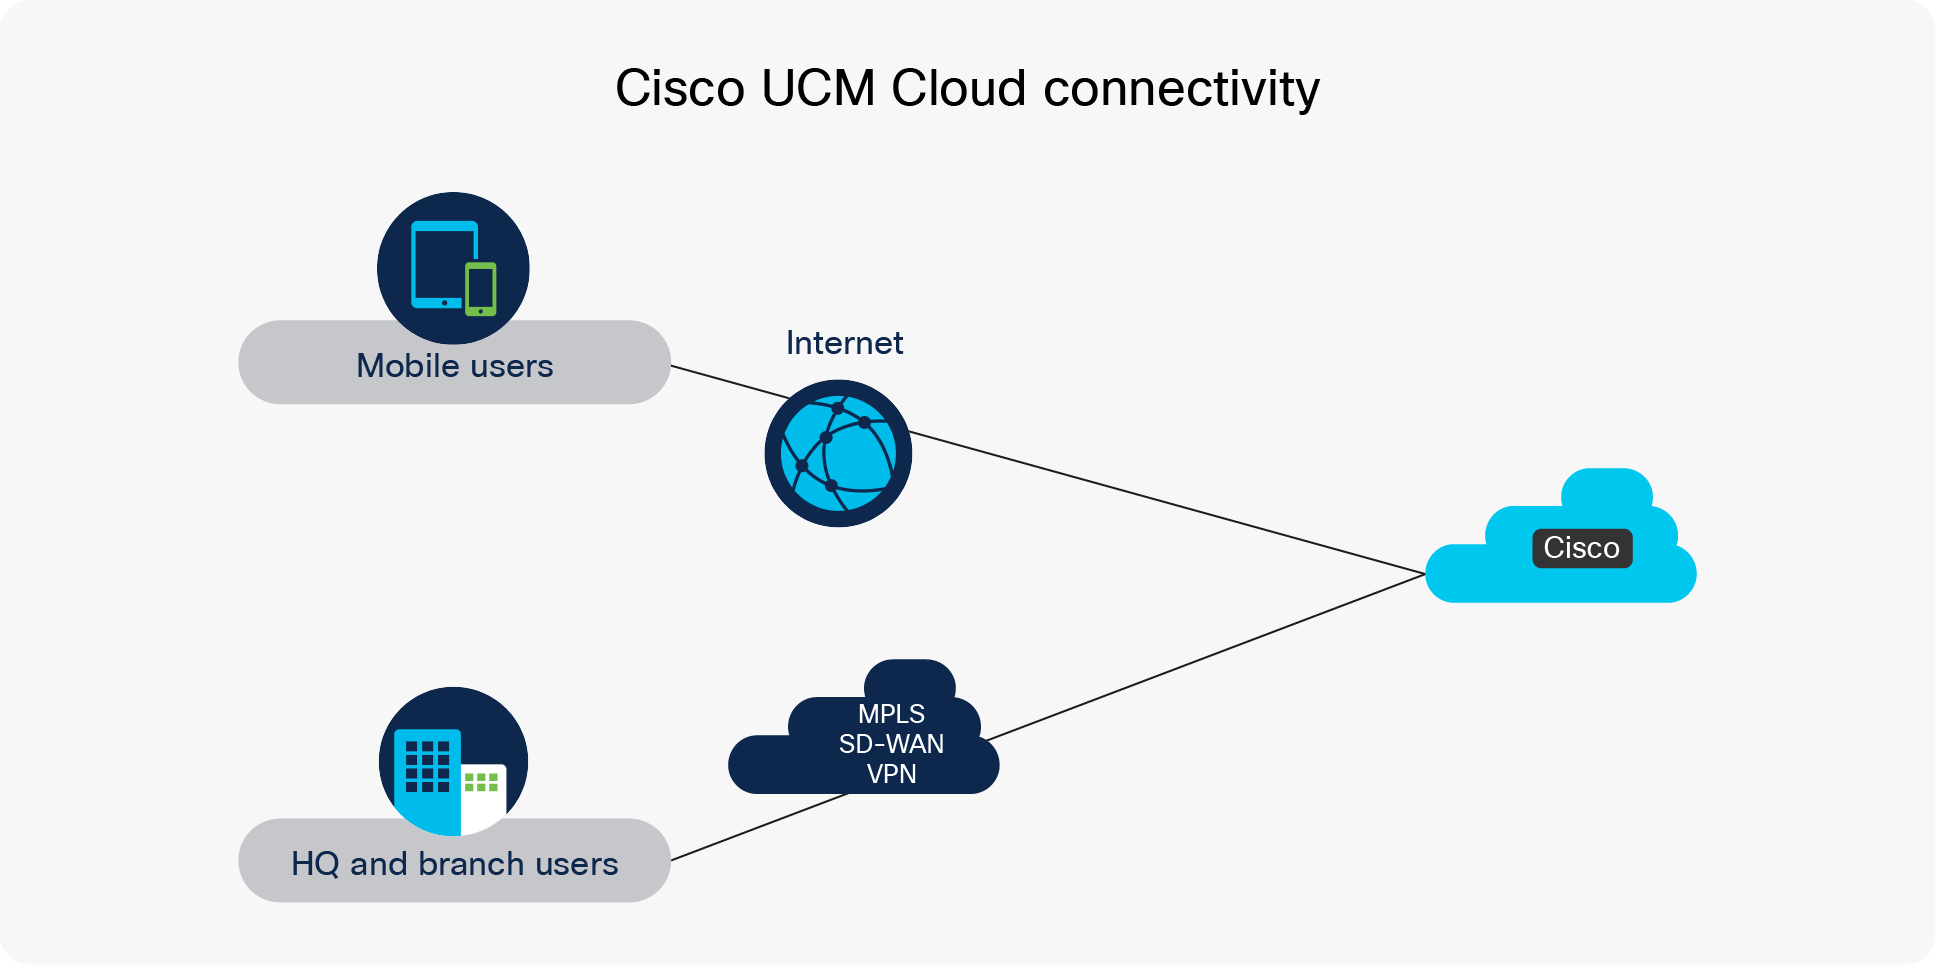 Overview of Cisco UCM Cloud